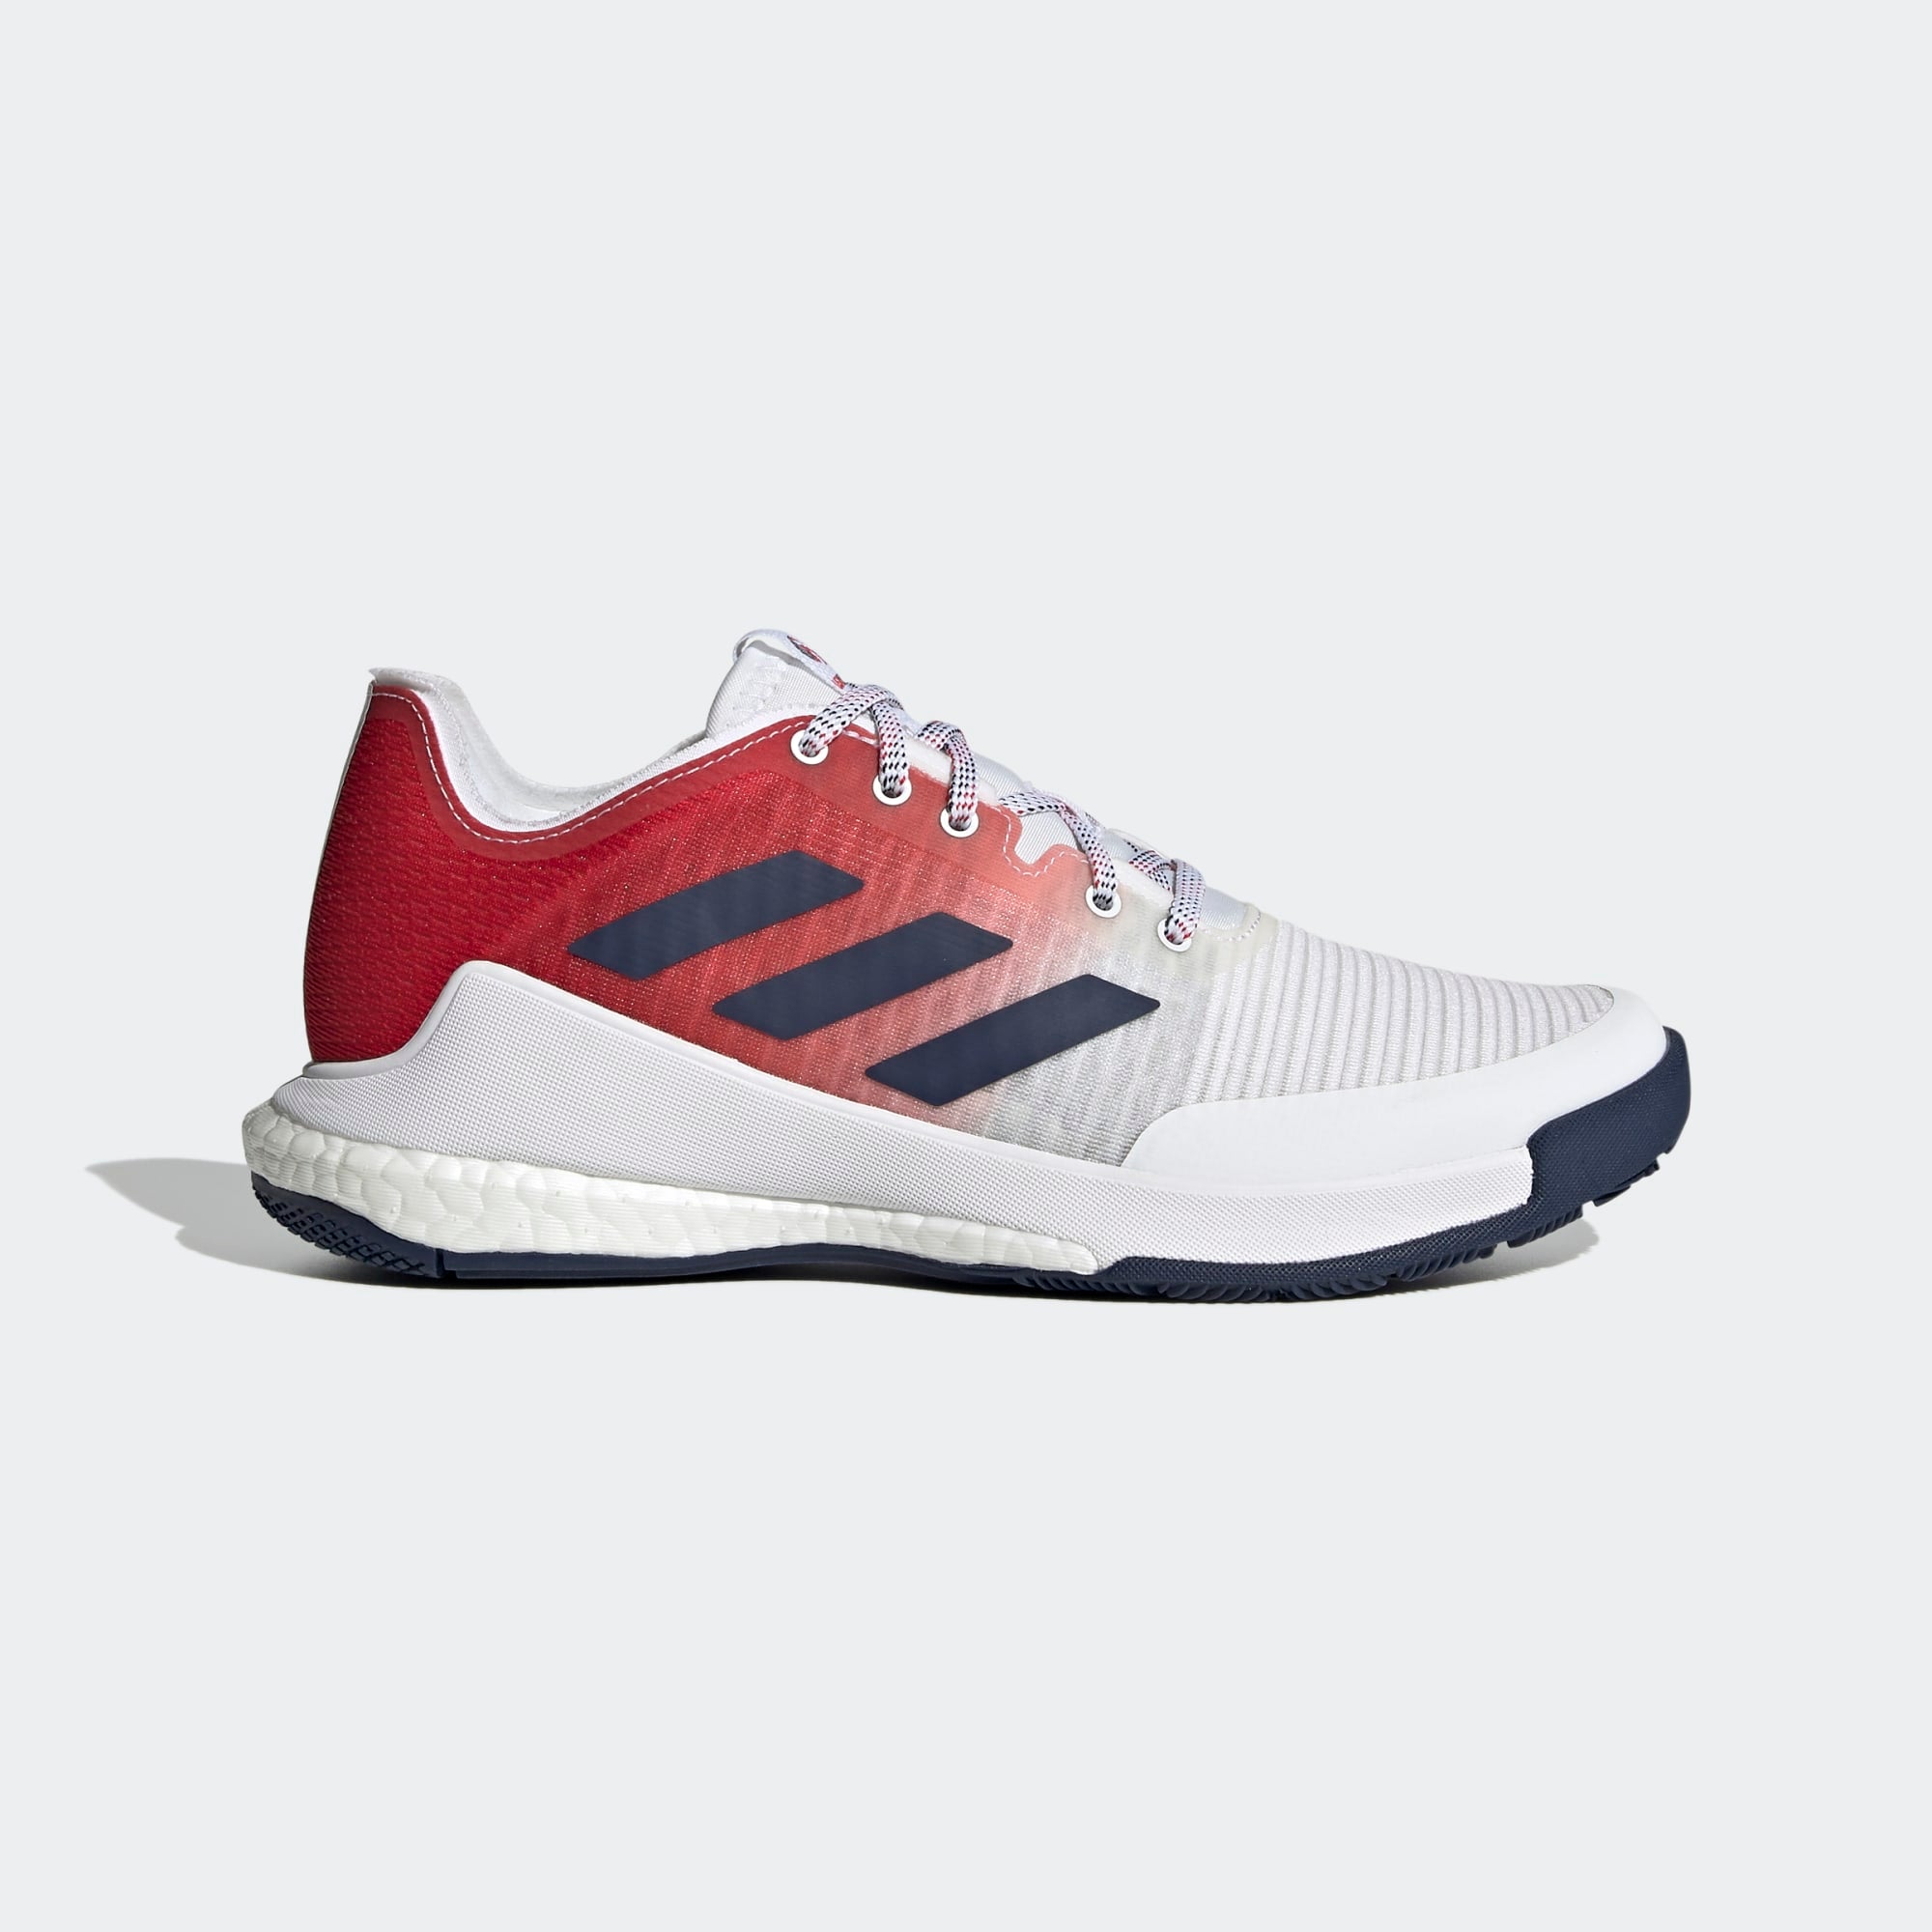 Adidas Women's Crazyflight W Shoes - CLEARANCE - MIRA'S Sports and More